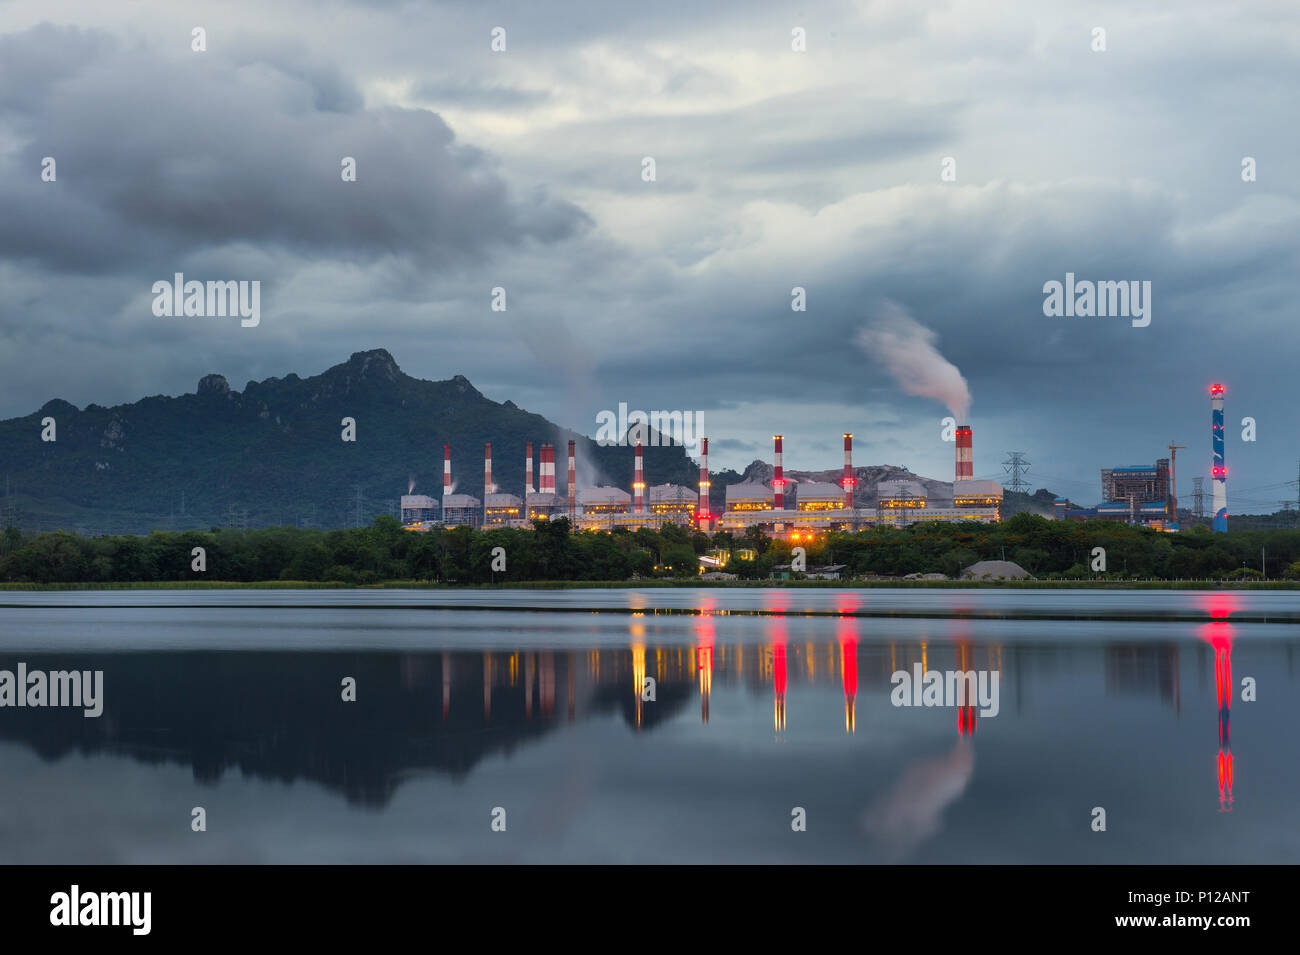 Industrial power plant with smokestack near the river. Stock Photo